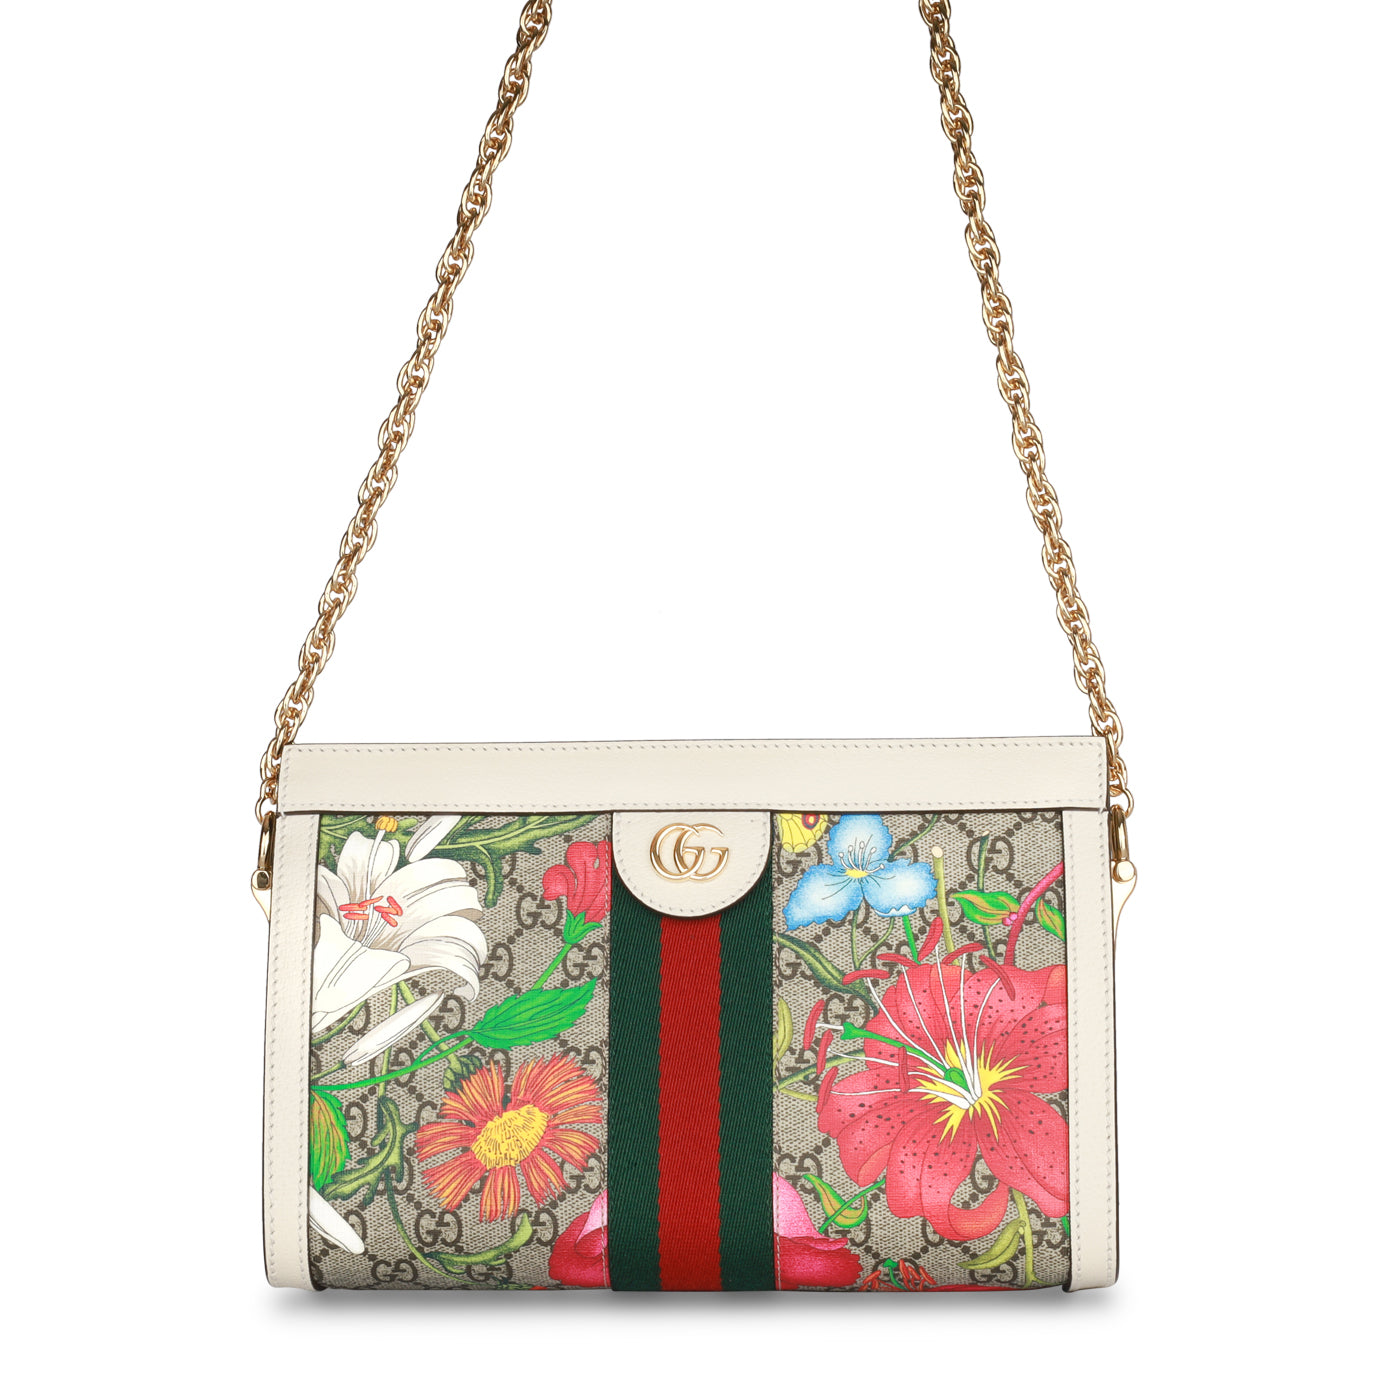 Gucci Bloom 😍 in 2023  Gucci pouch bag, Gucci floral bag, Gucci pouch